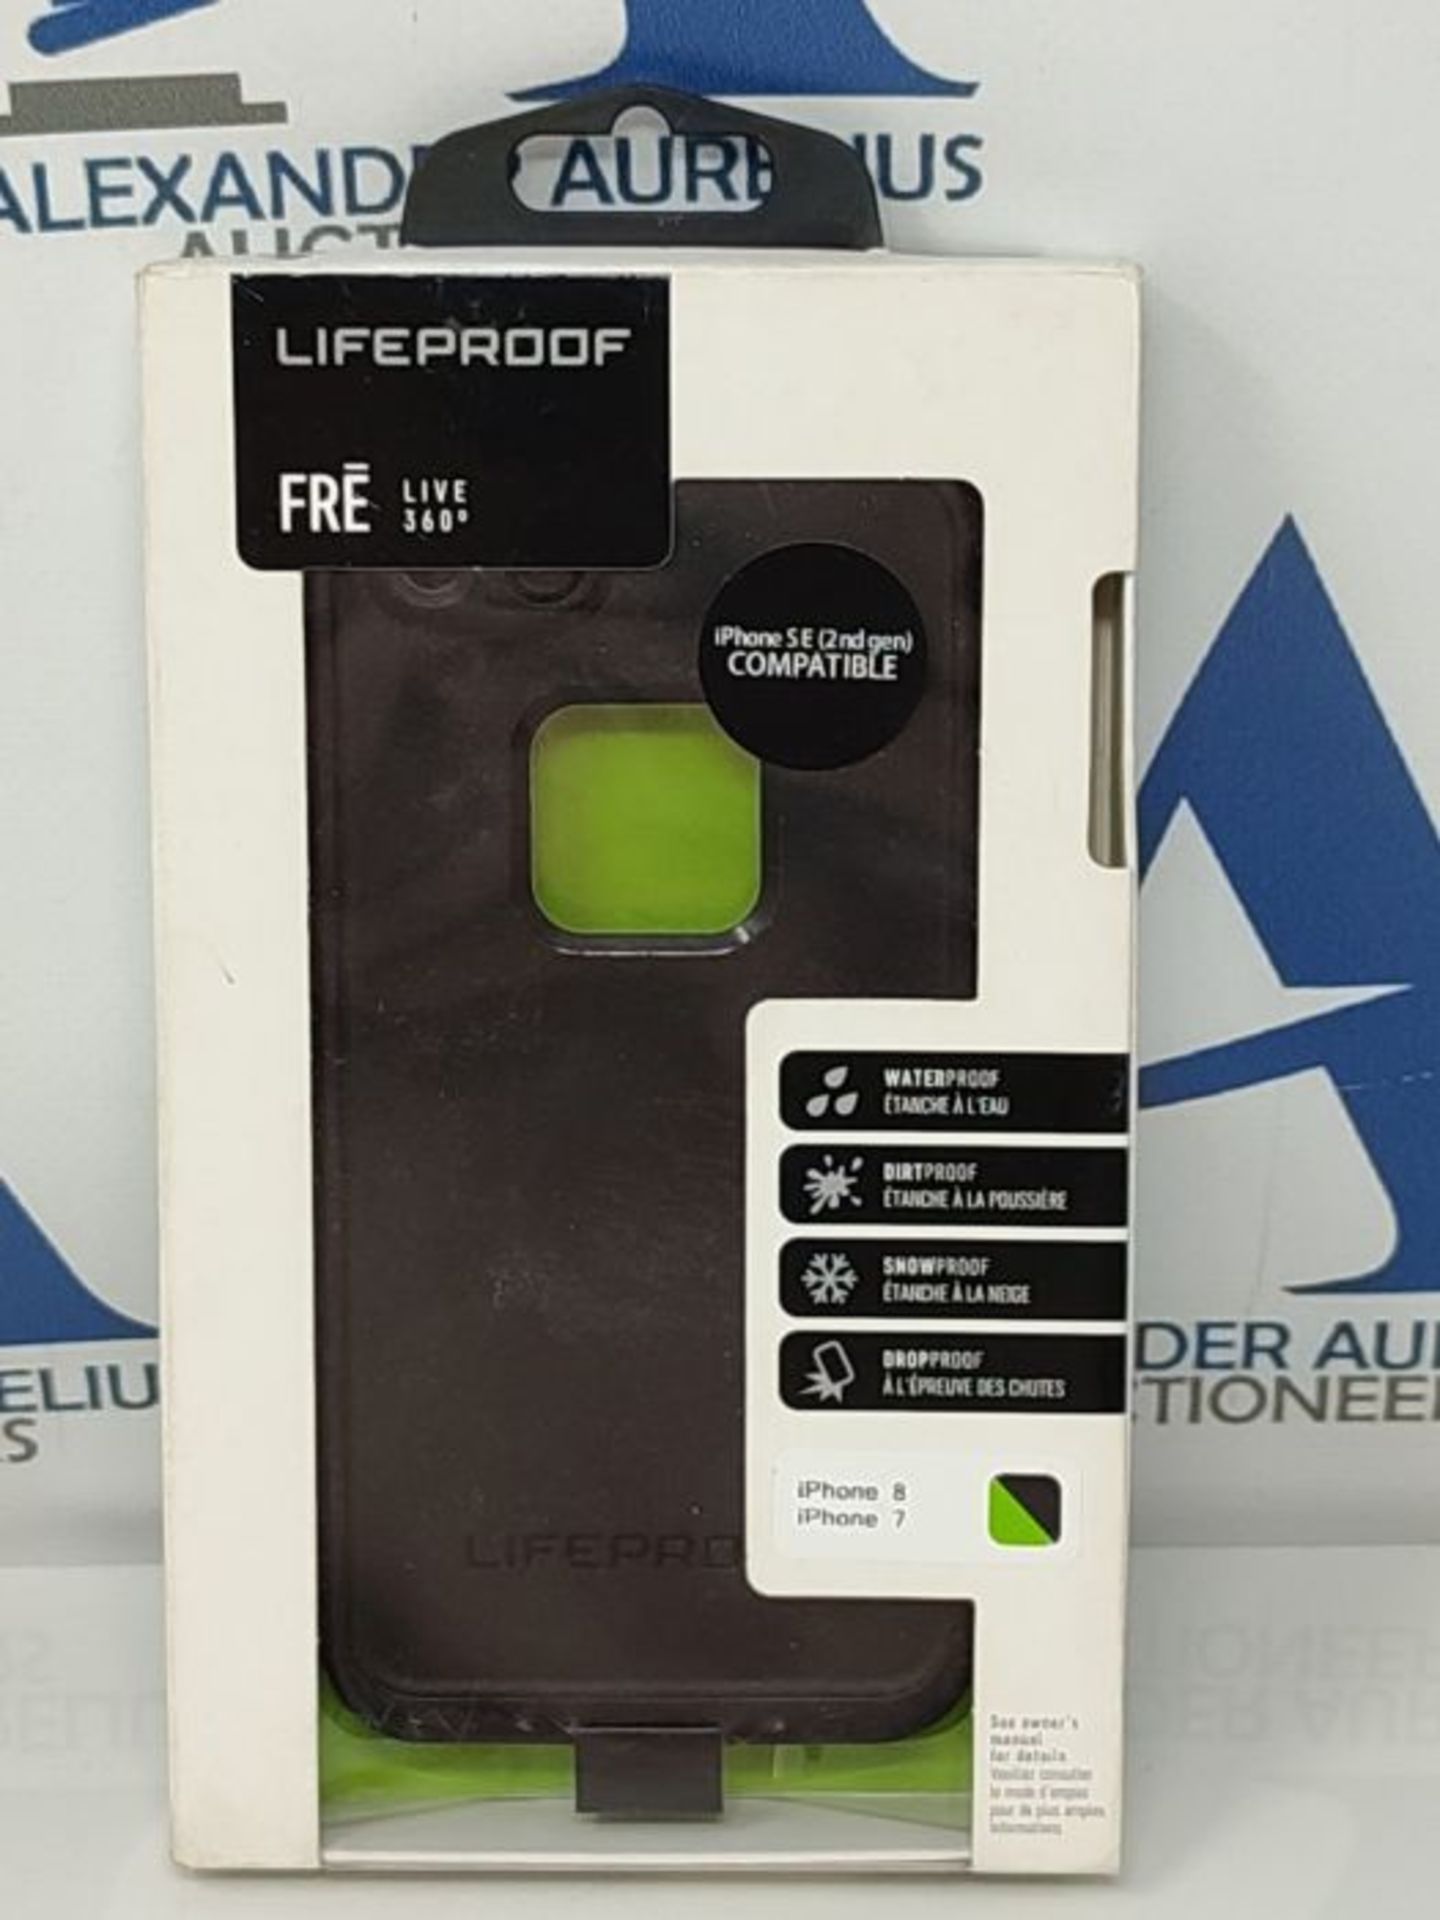 RRP £54.00 LifeProof FRE, LIVE 360°. Fully-enclosed, WATERproof case for Apple iPhone 7/8 & iPho - Image 2 of 3